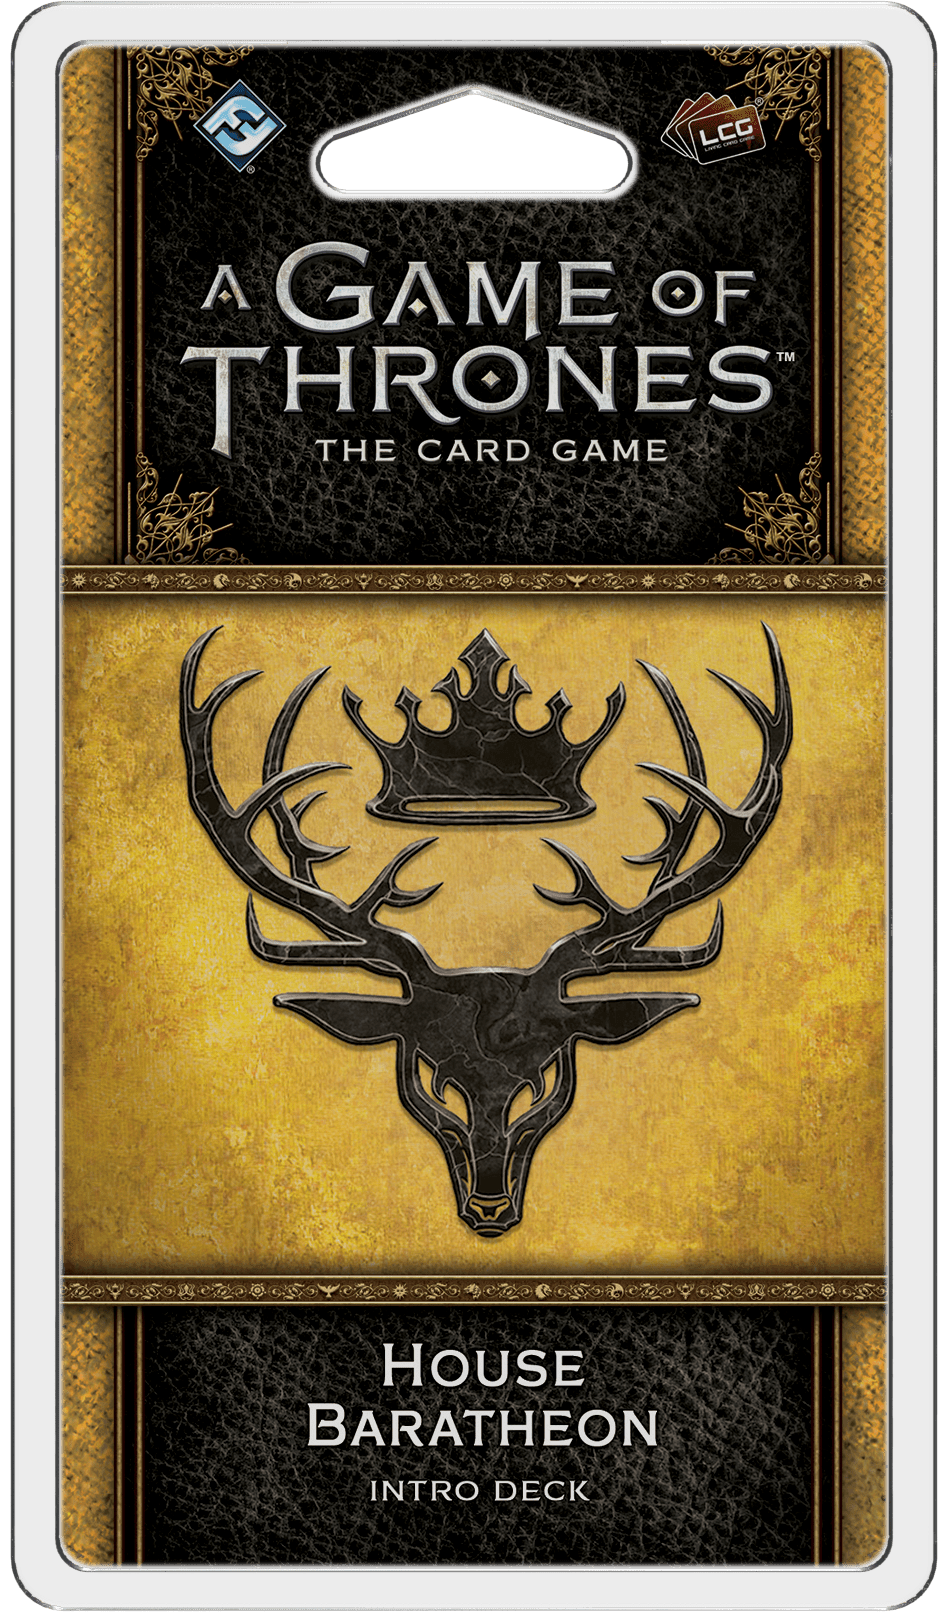 A Game of Thrones: The Card Game (Second Edition) – House Baratheon Intro Deck